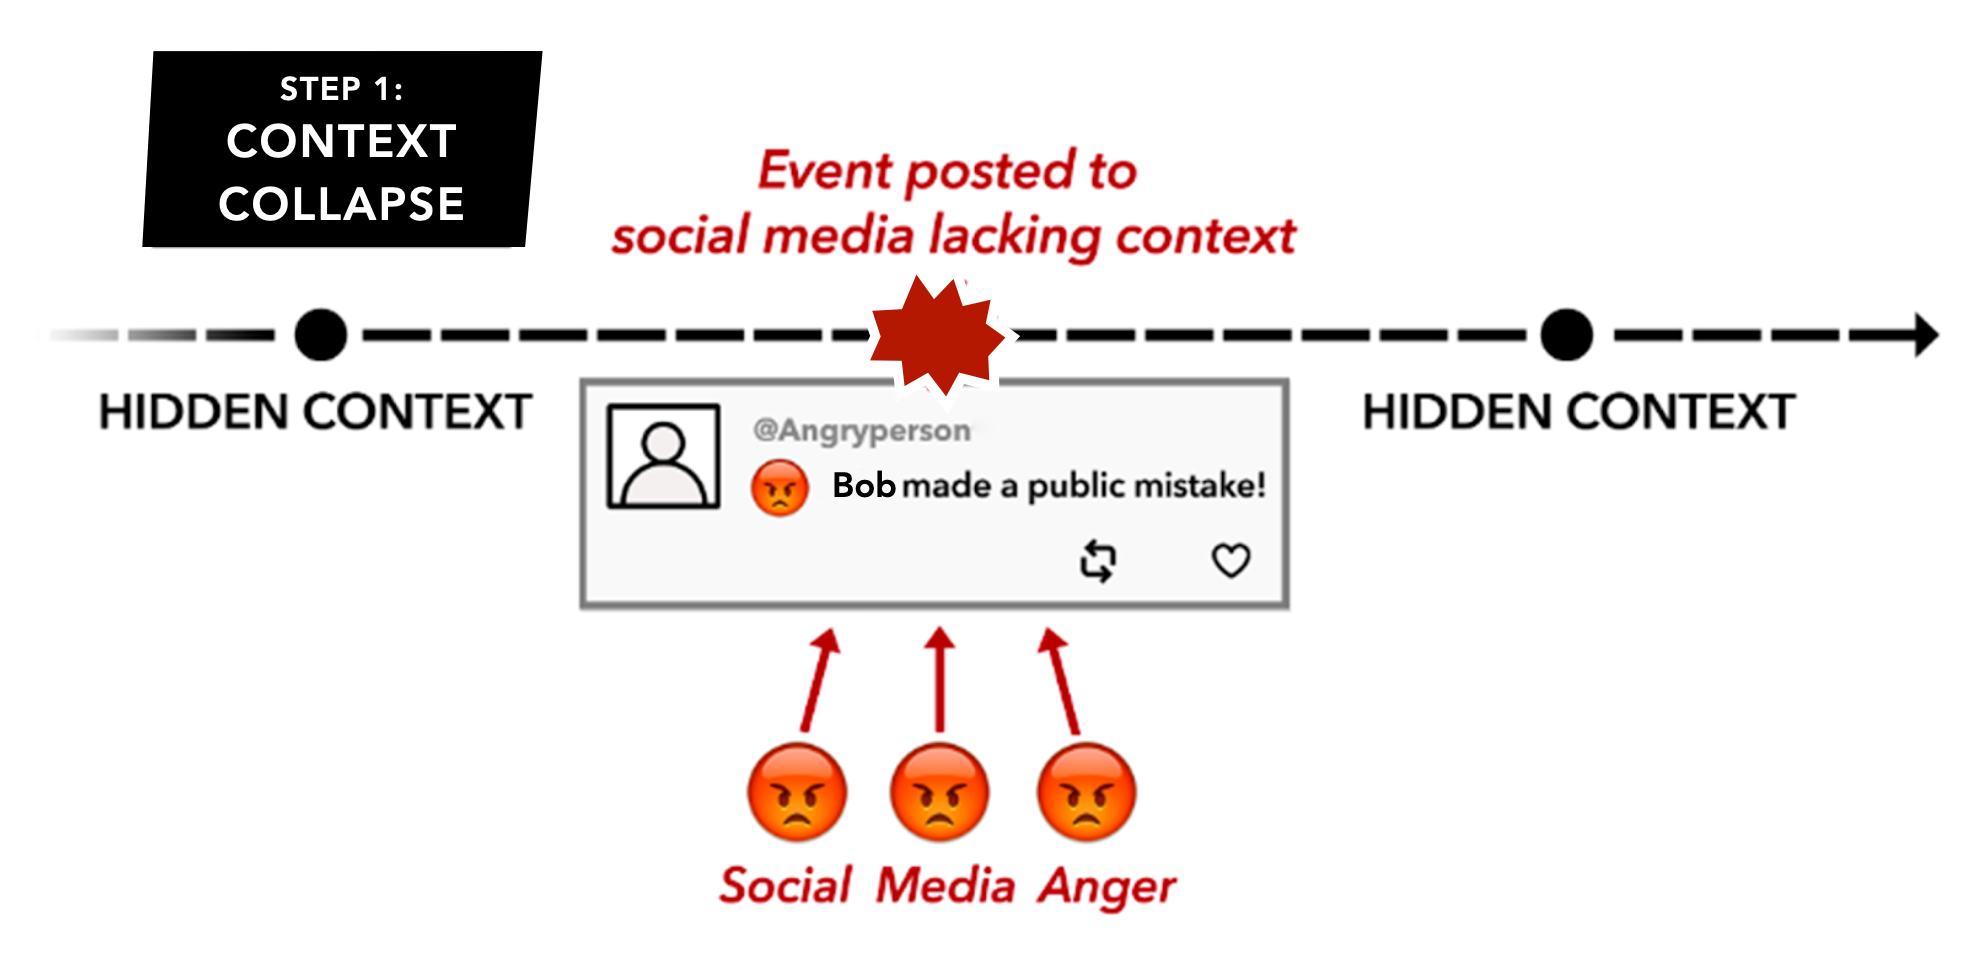 A chart demonstrating "context collapse" utilizing a number of angry-face emojis and a tweet reading "Bob made a mistake!"